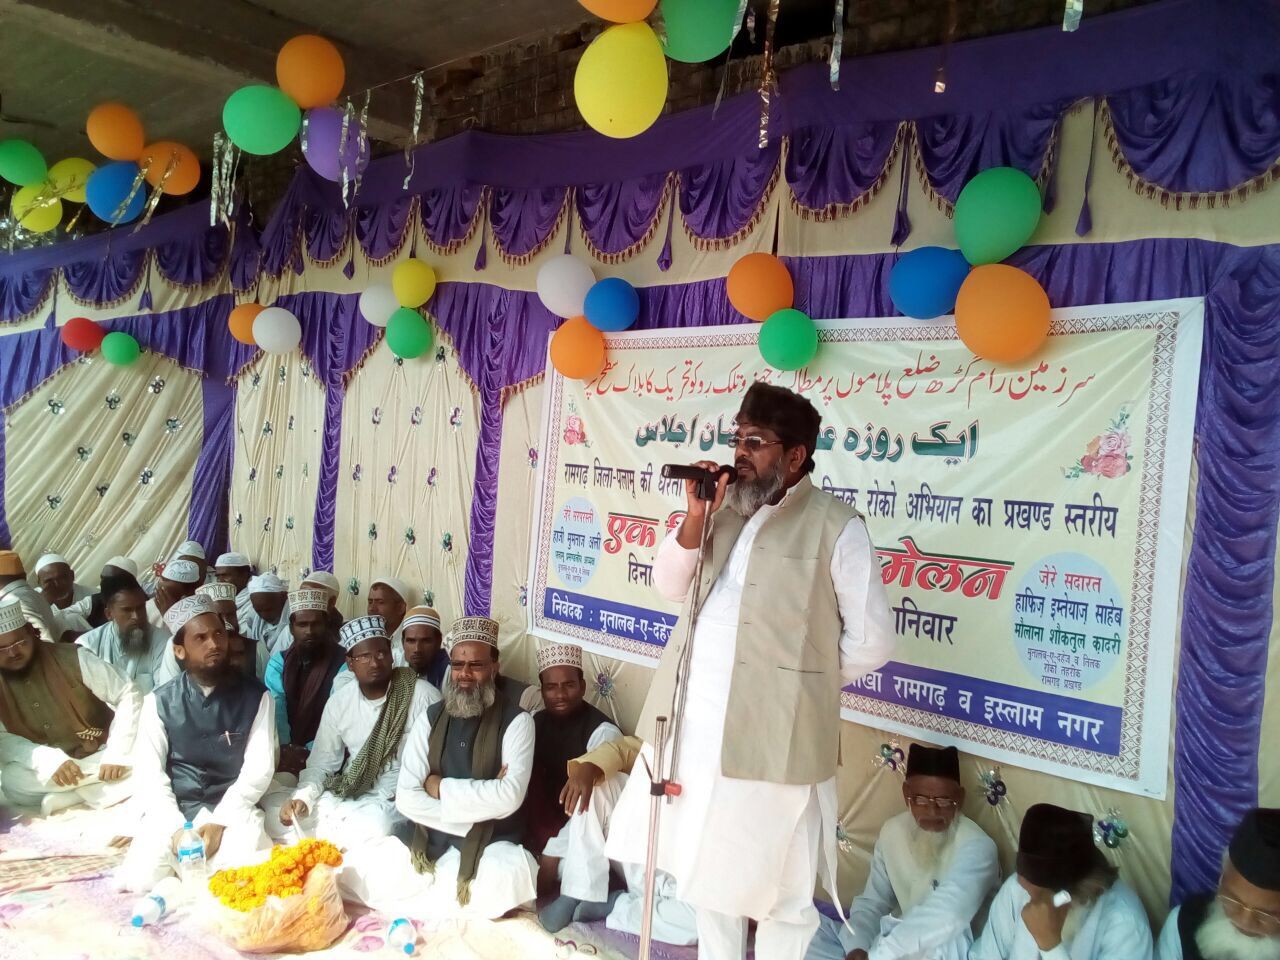 Muslims, Hindus stand united in Jharkhand’s new anti-dowry movement  